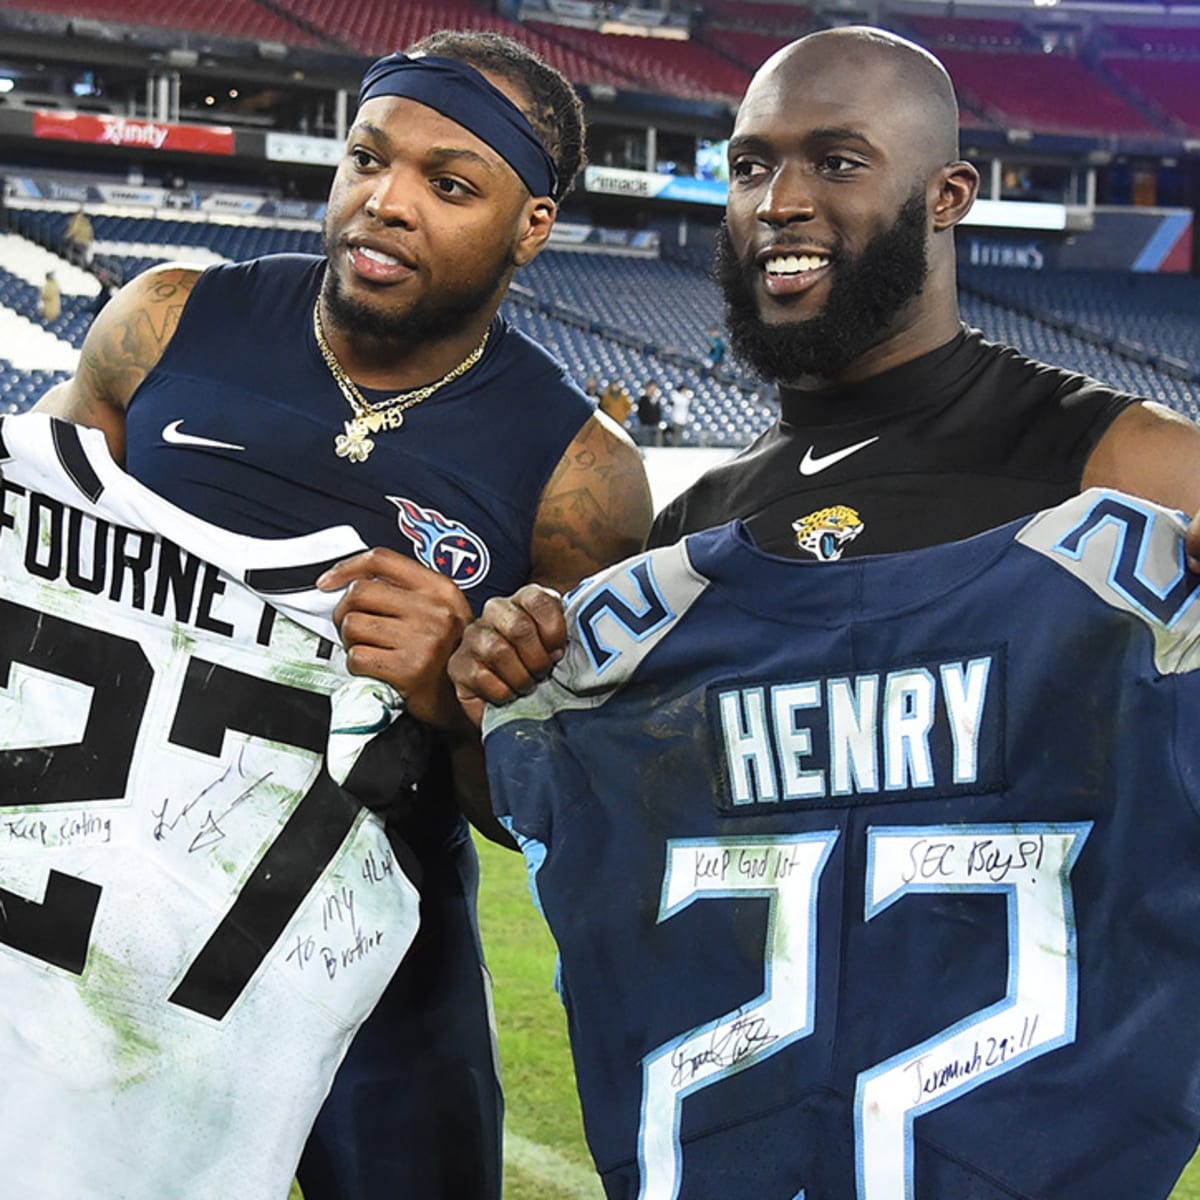 Jersey swaps between players banned as part of NFL's coronavirus protocols  - Los Angeles Times